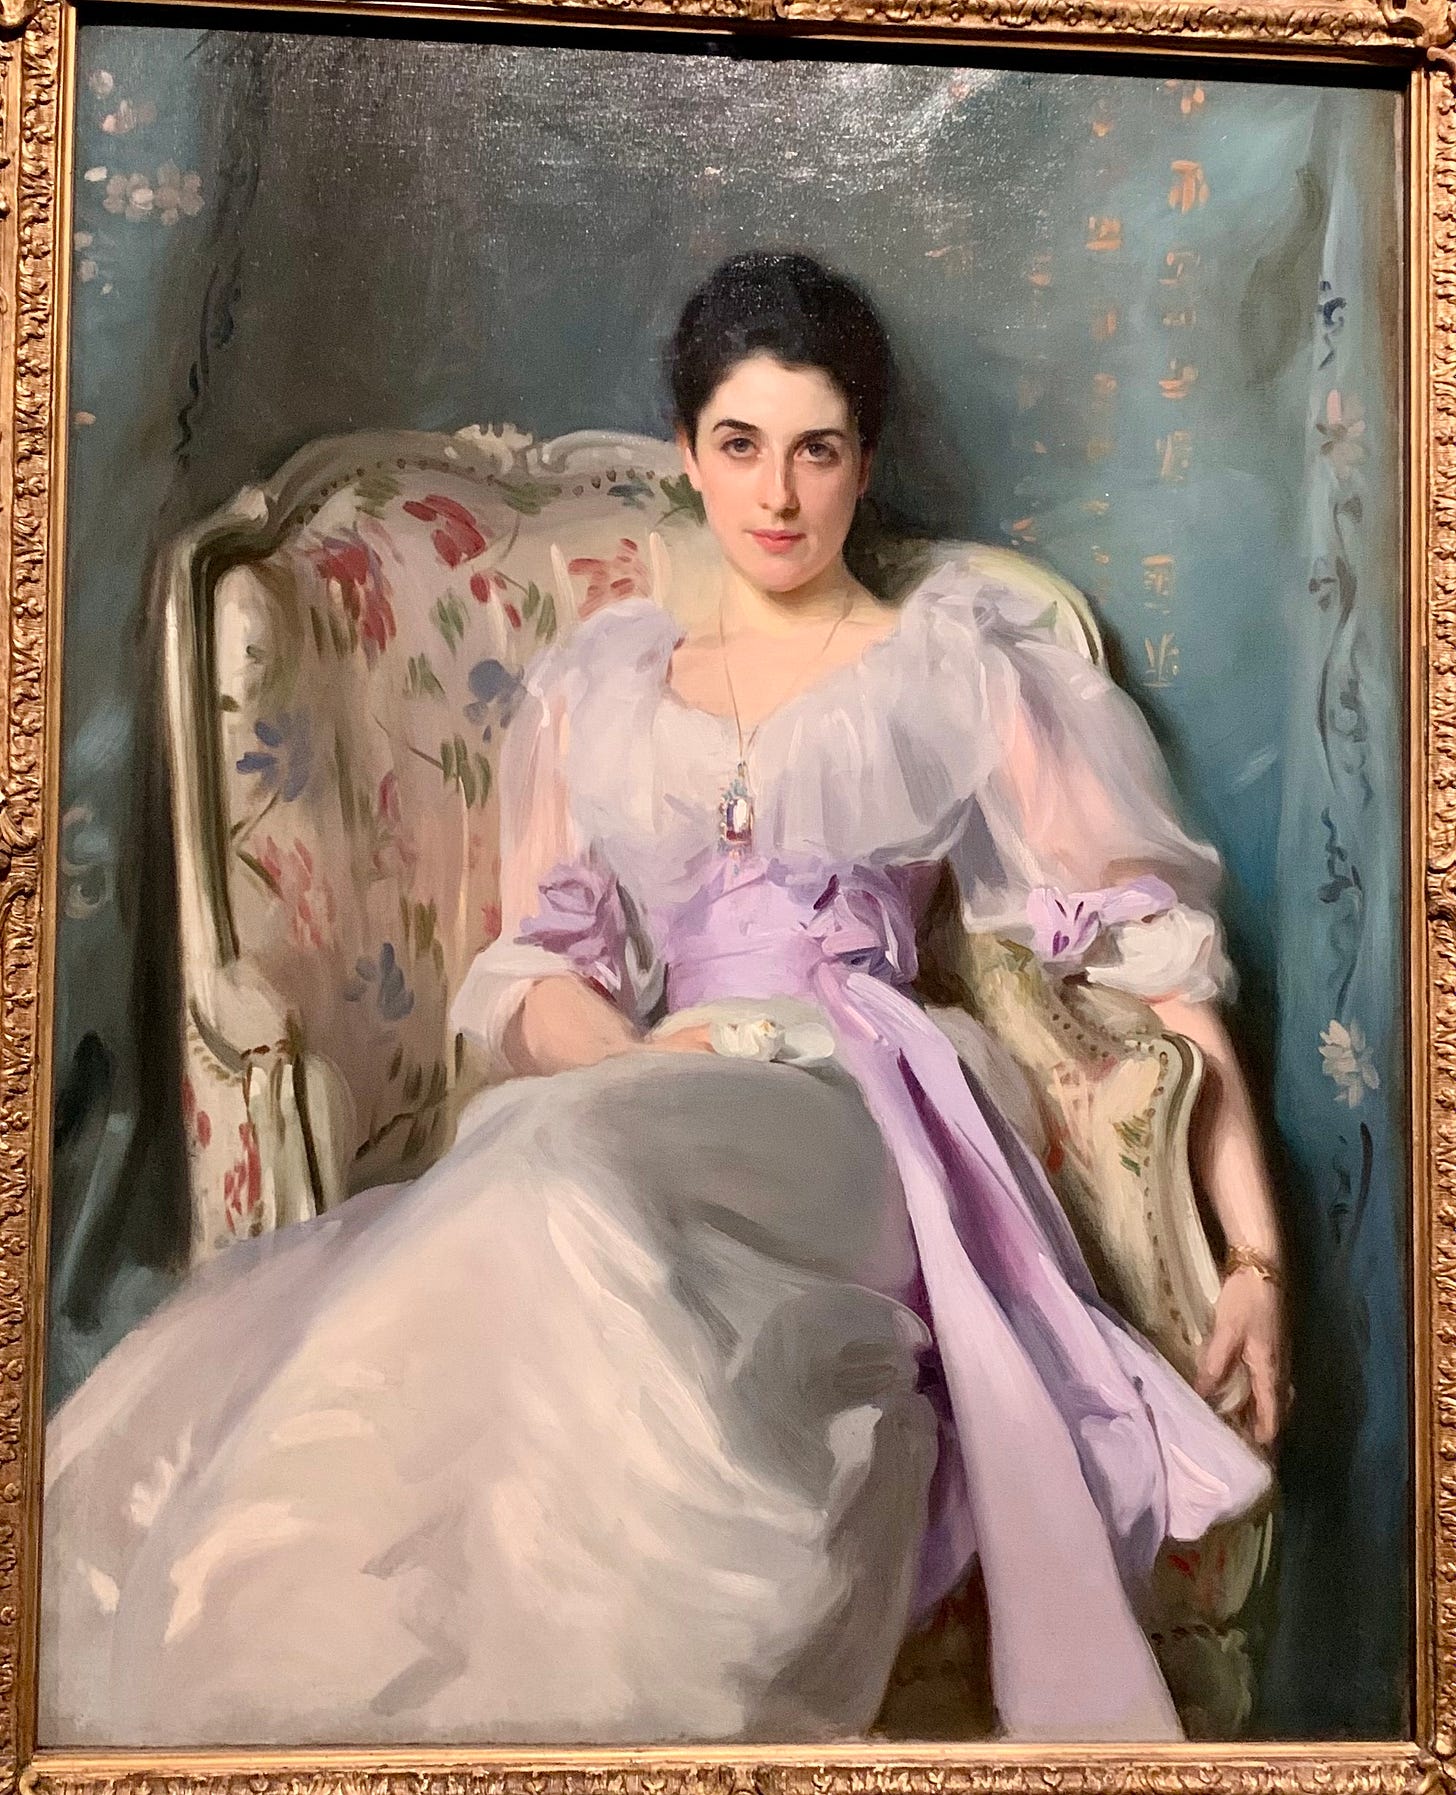 View of Sargent portrait Lady Agnew of Lachdaw